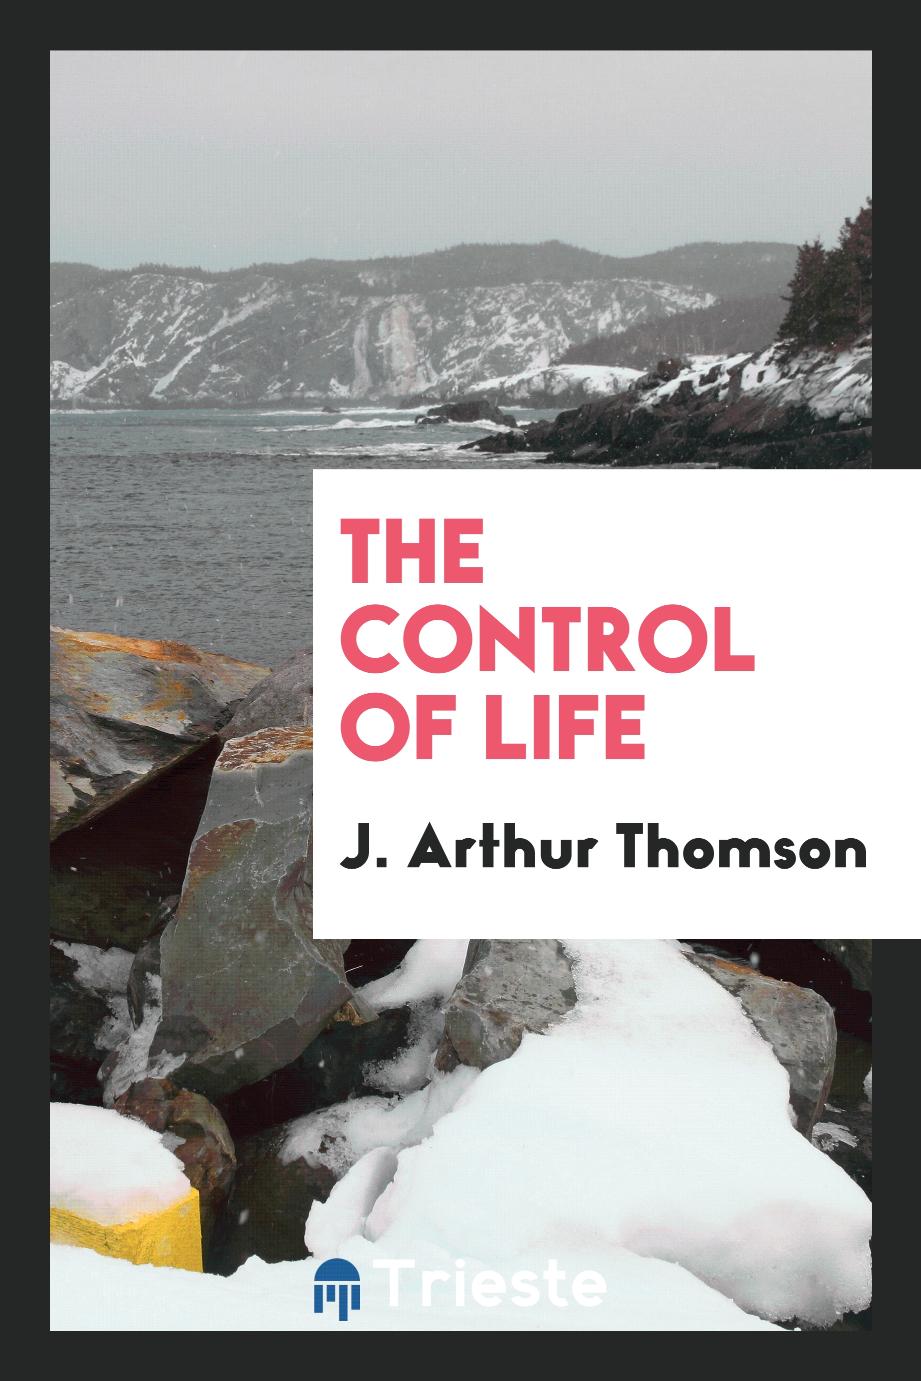 The control of life